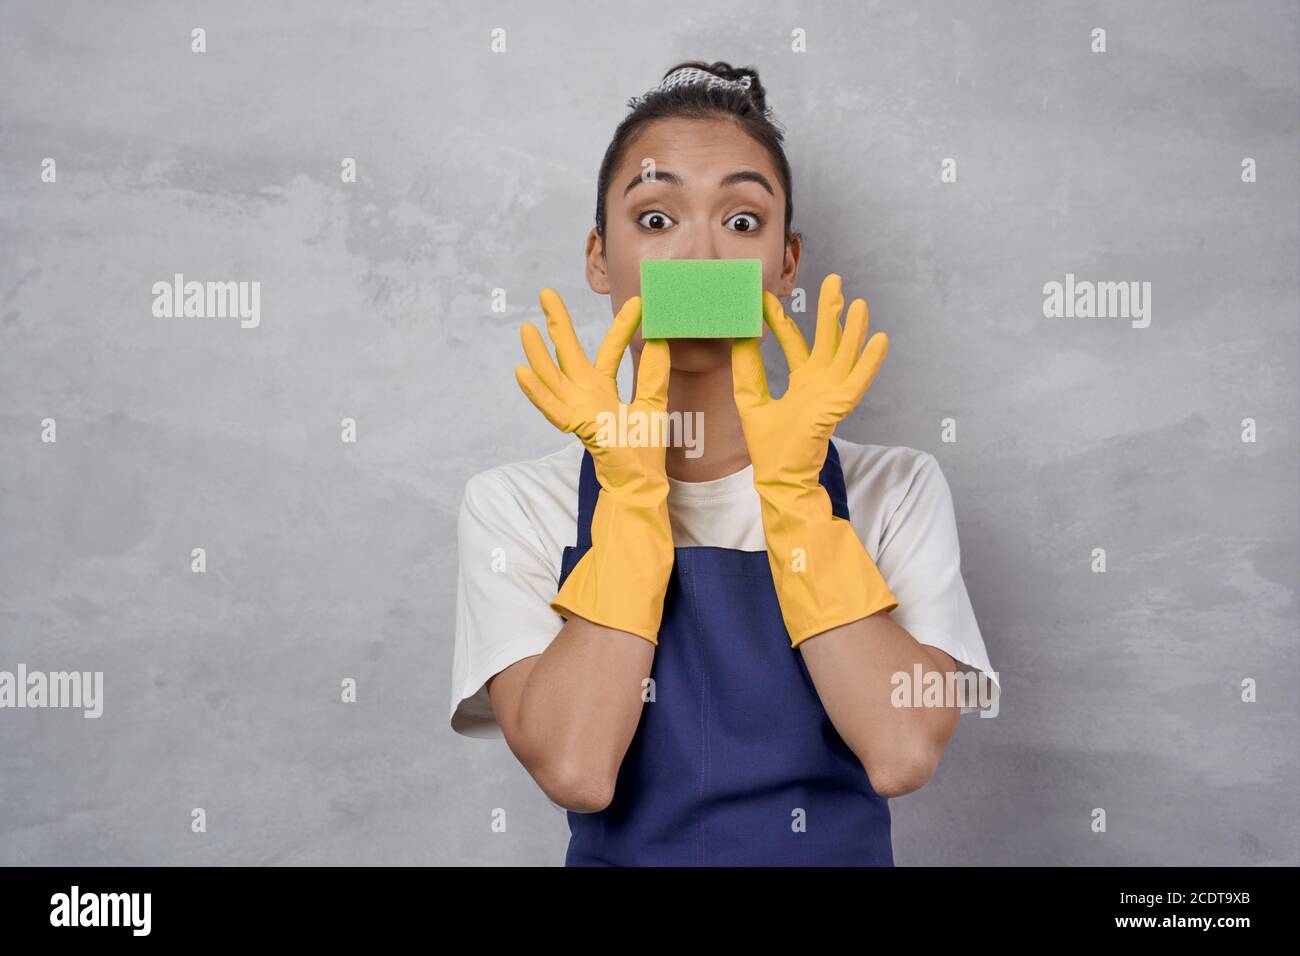 Funny cleaning lady in uniform and rubber gloves playing with kitchen sponge, looking at camera and smiling while standing against grey wall. Studio shot. Housekeeping, cleaning services Stock Photo